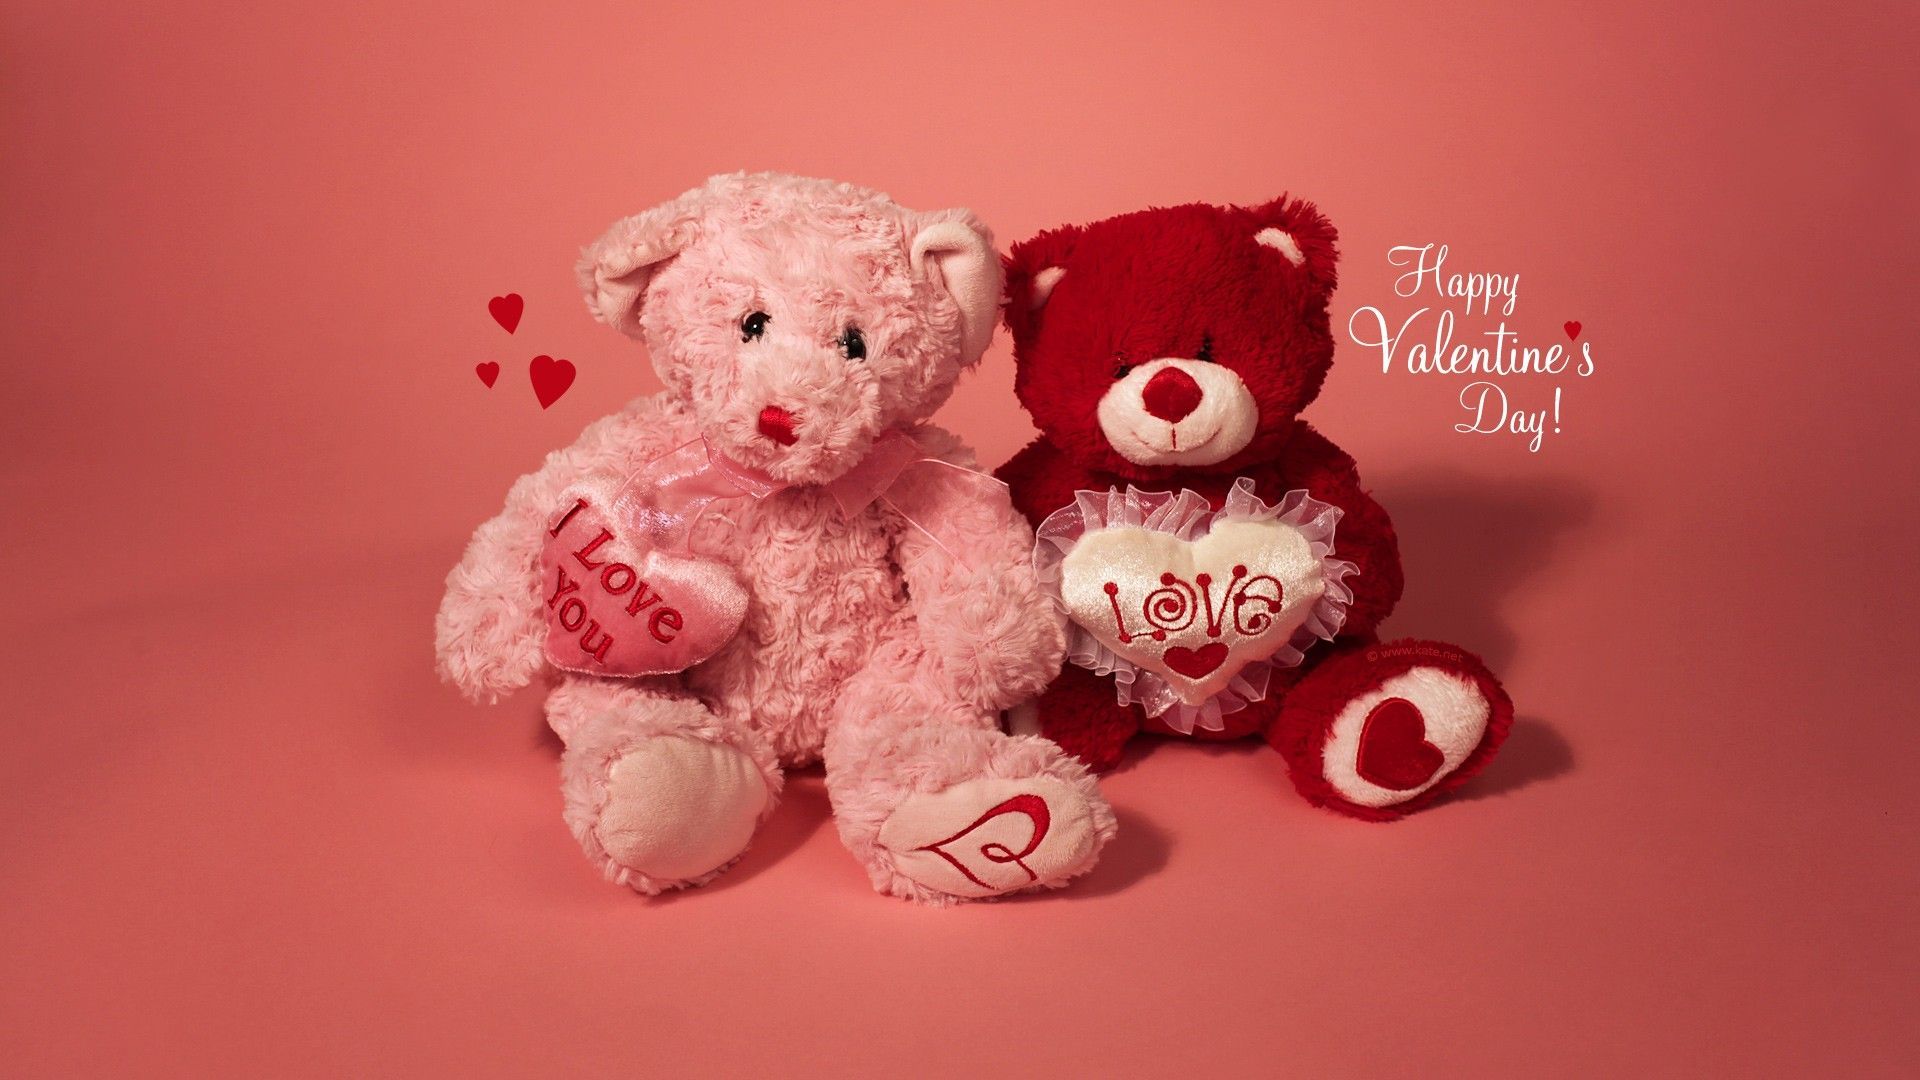 Happy Valentines Day Cute Picture .com